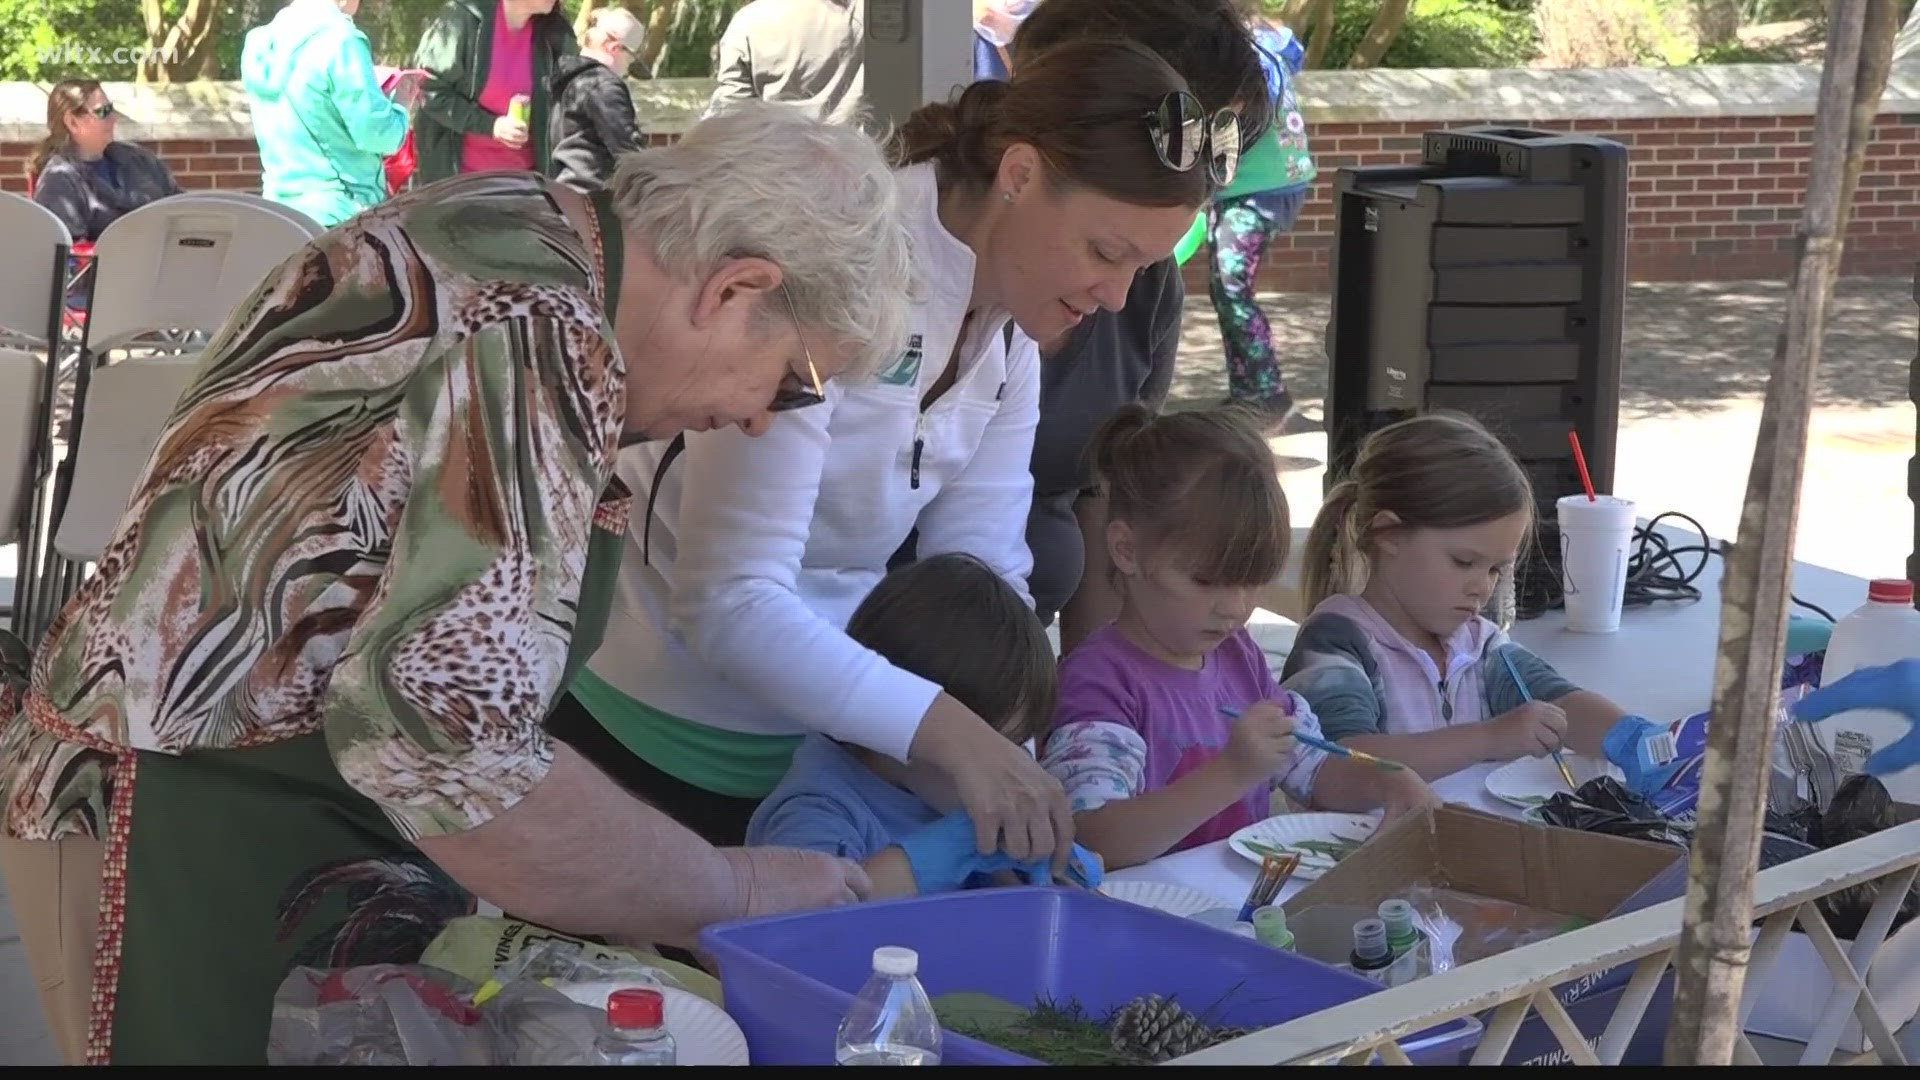 They city of Orangeburg Parks and Recreation hosted an Earth Day celebration filled with arts, crafts and education.